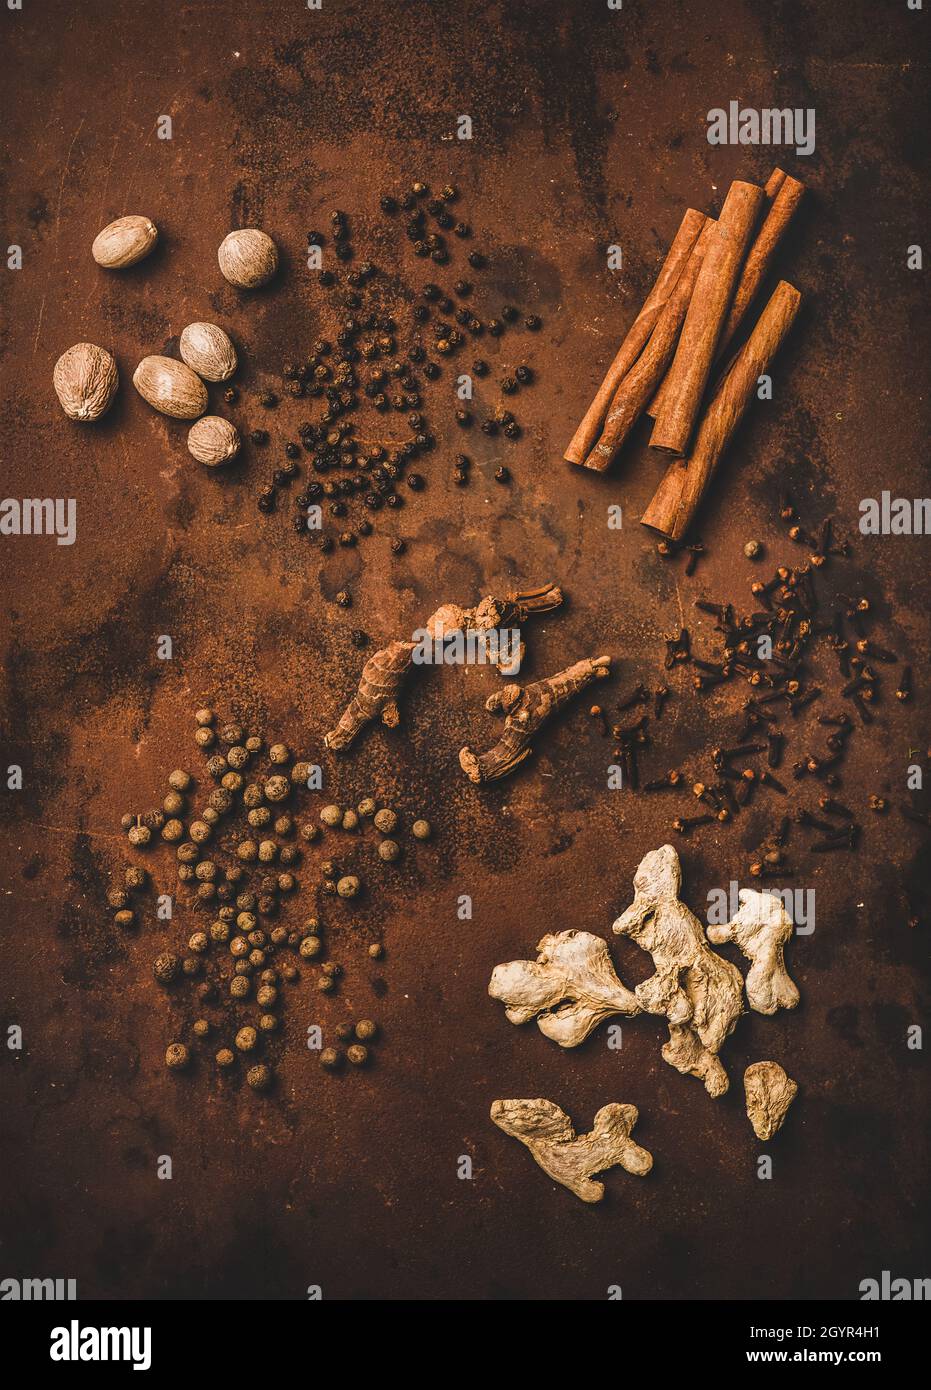 Turkish seven spice Yedi Bahar mix, top view Stock Photo